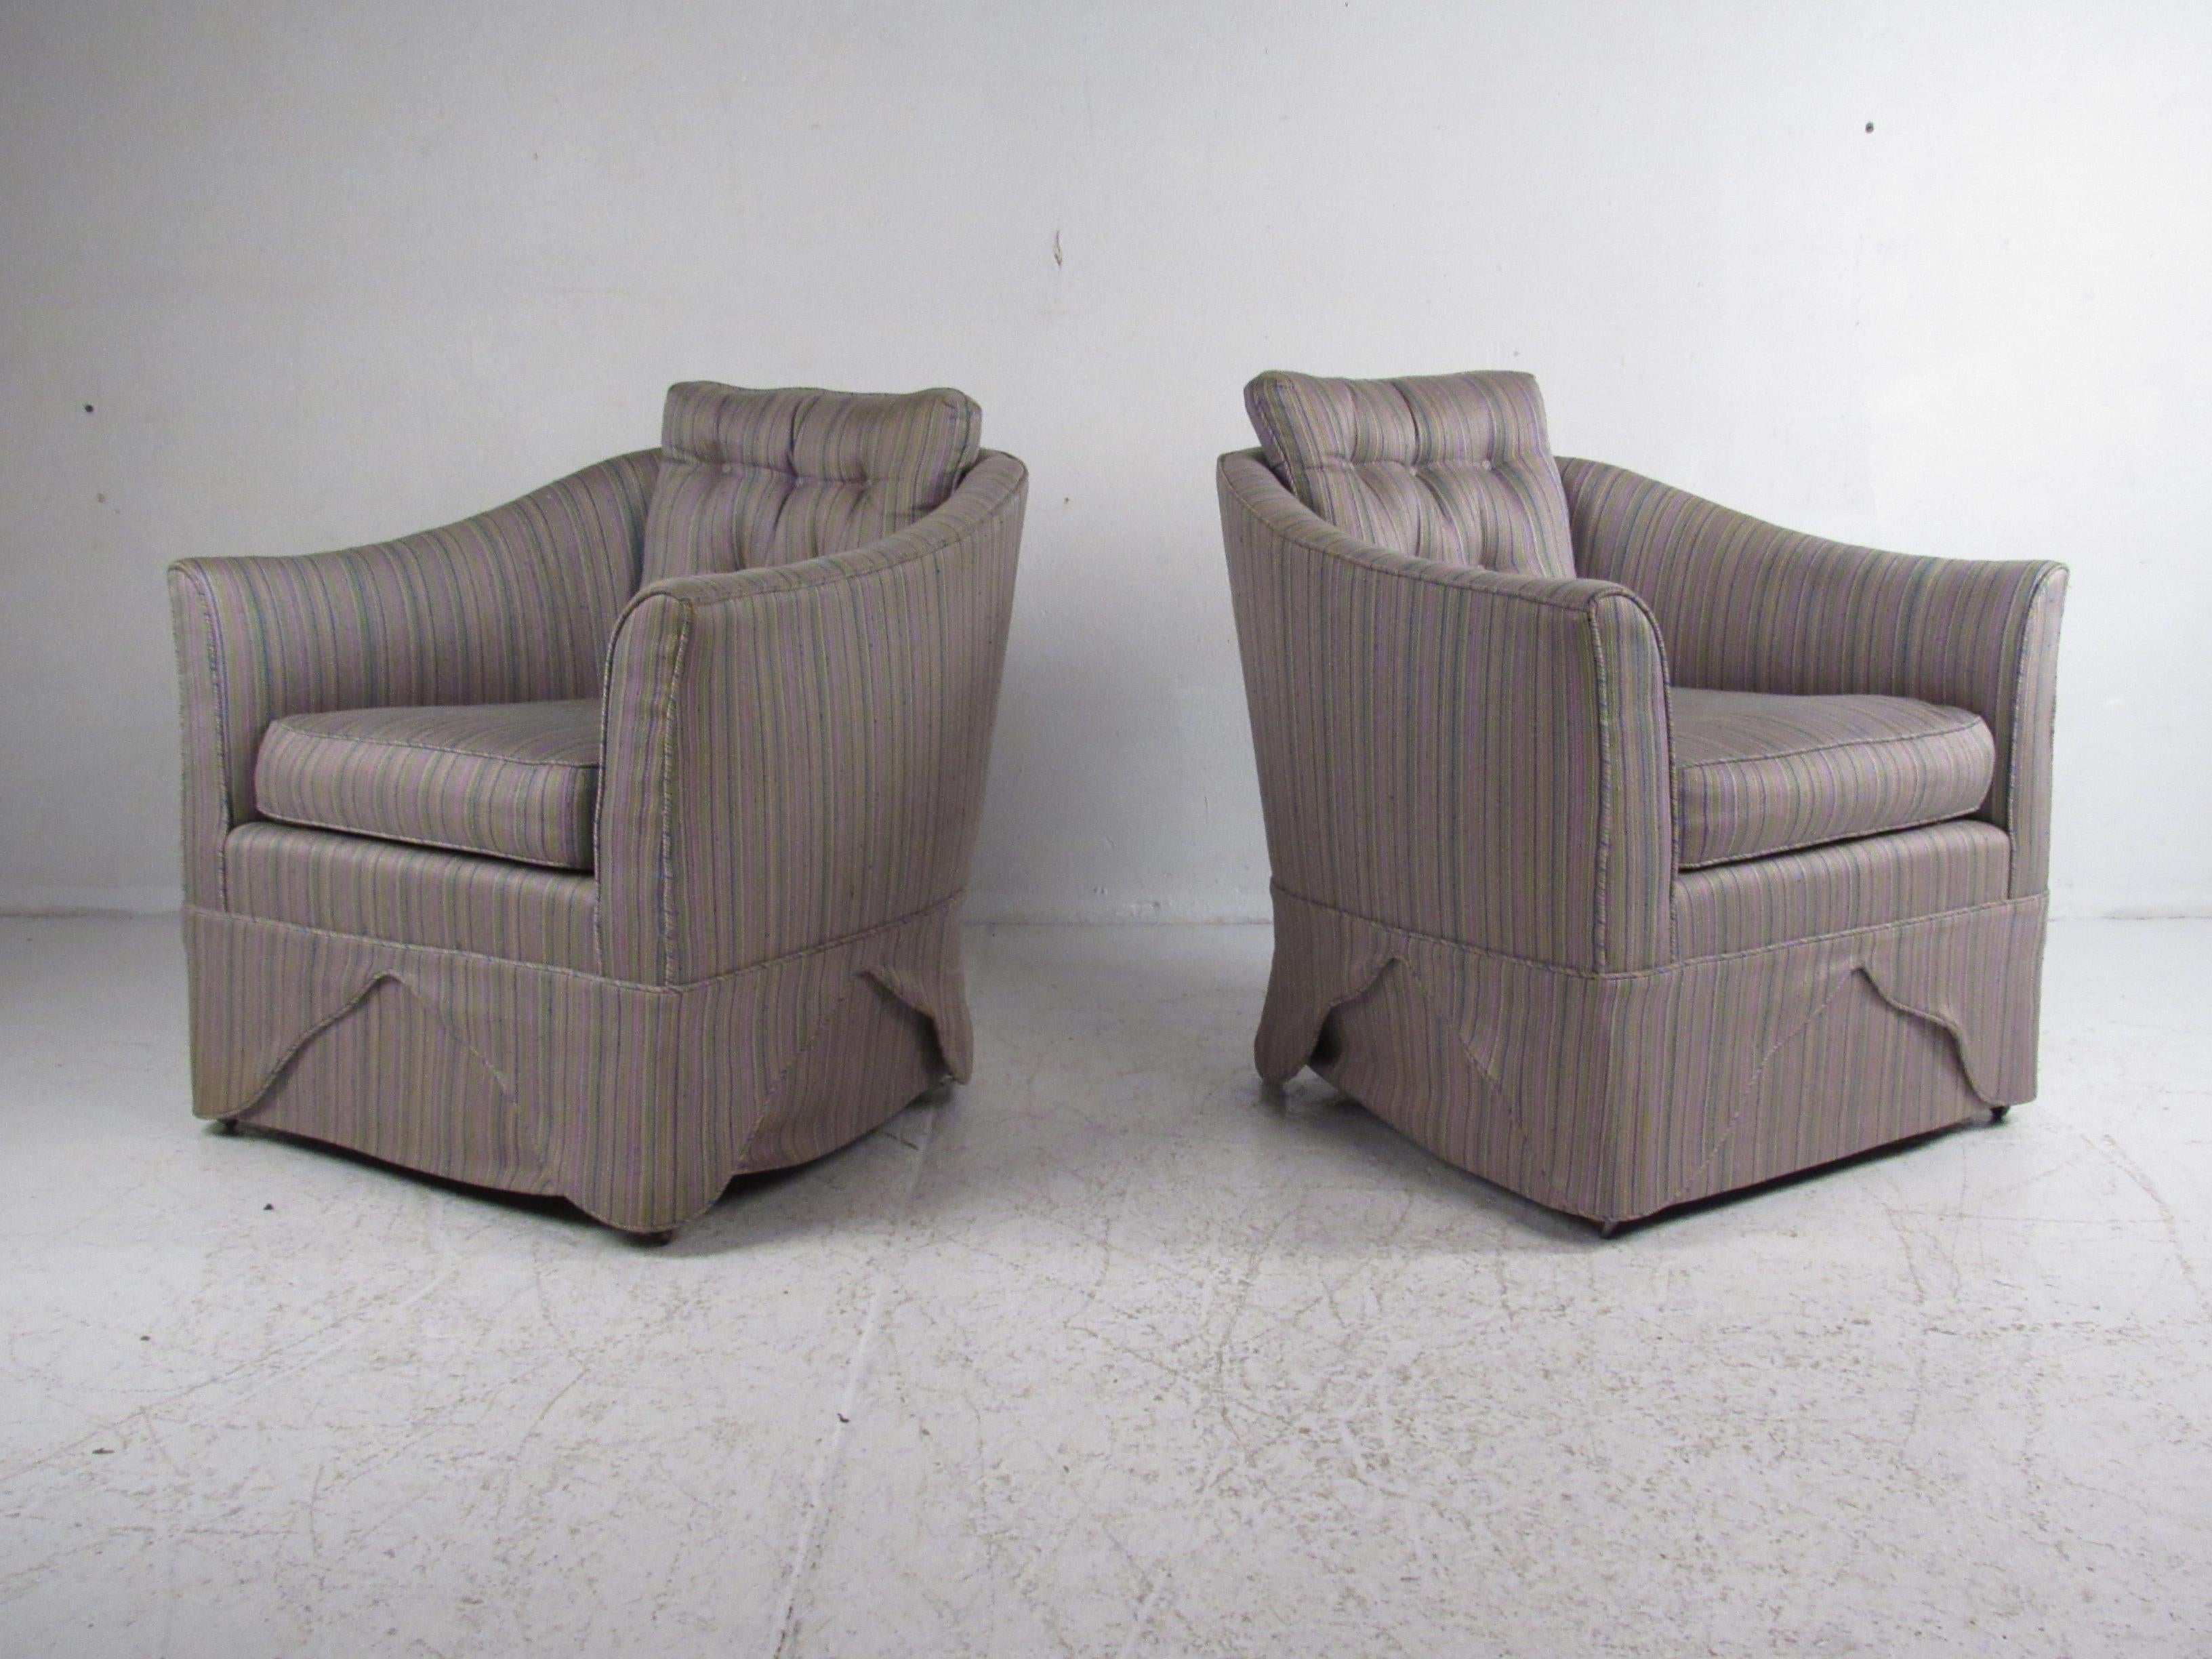 Pair of Mid-Century Modern Barrel Back Lounge Chairs In Good Condition For Sale In Brooklyn, NY